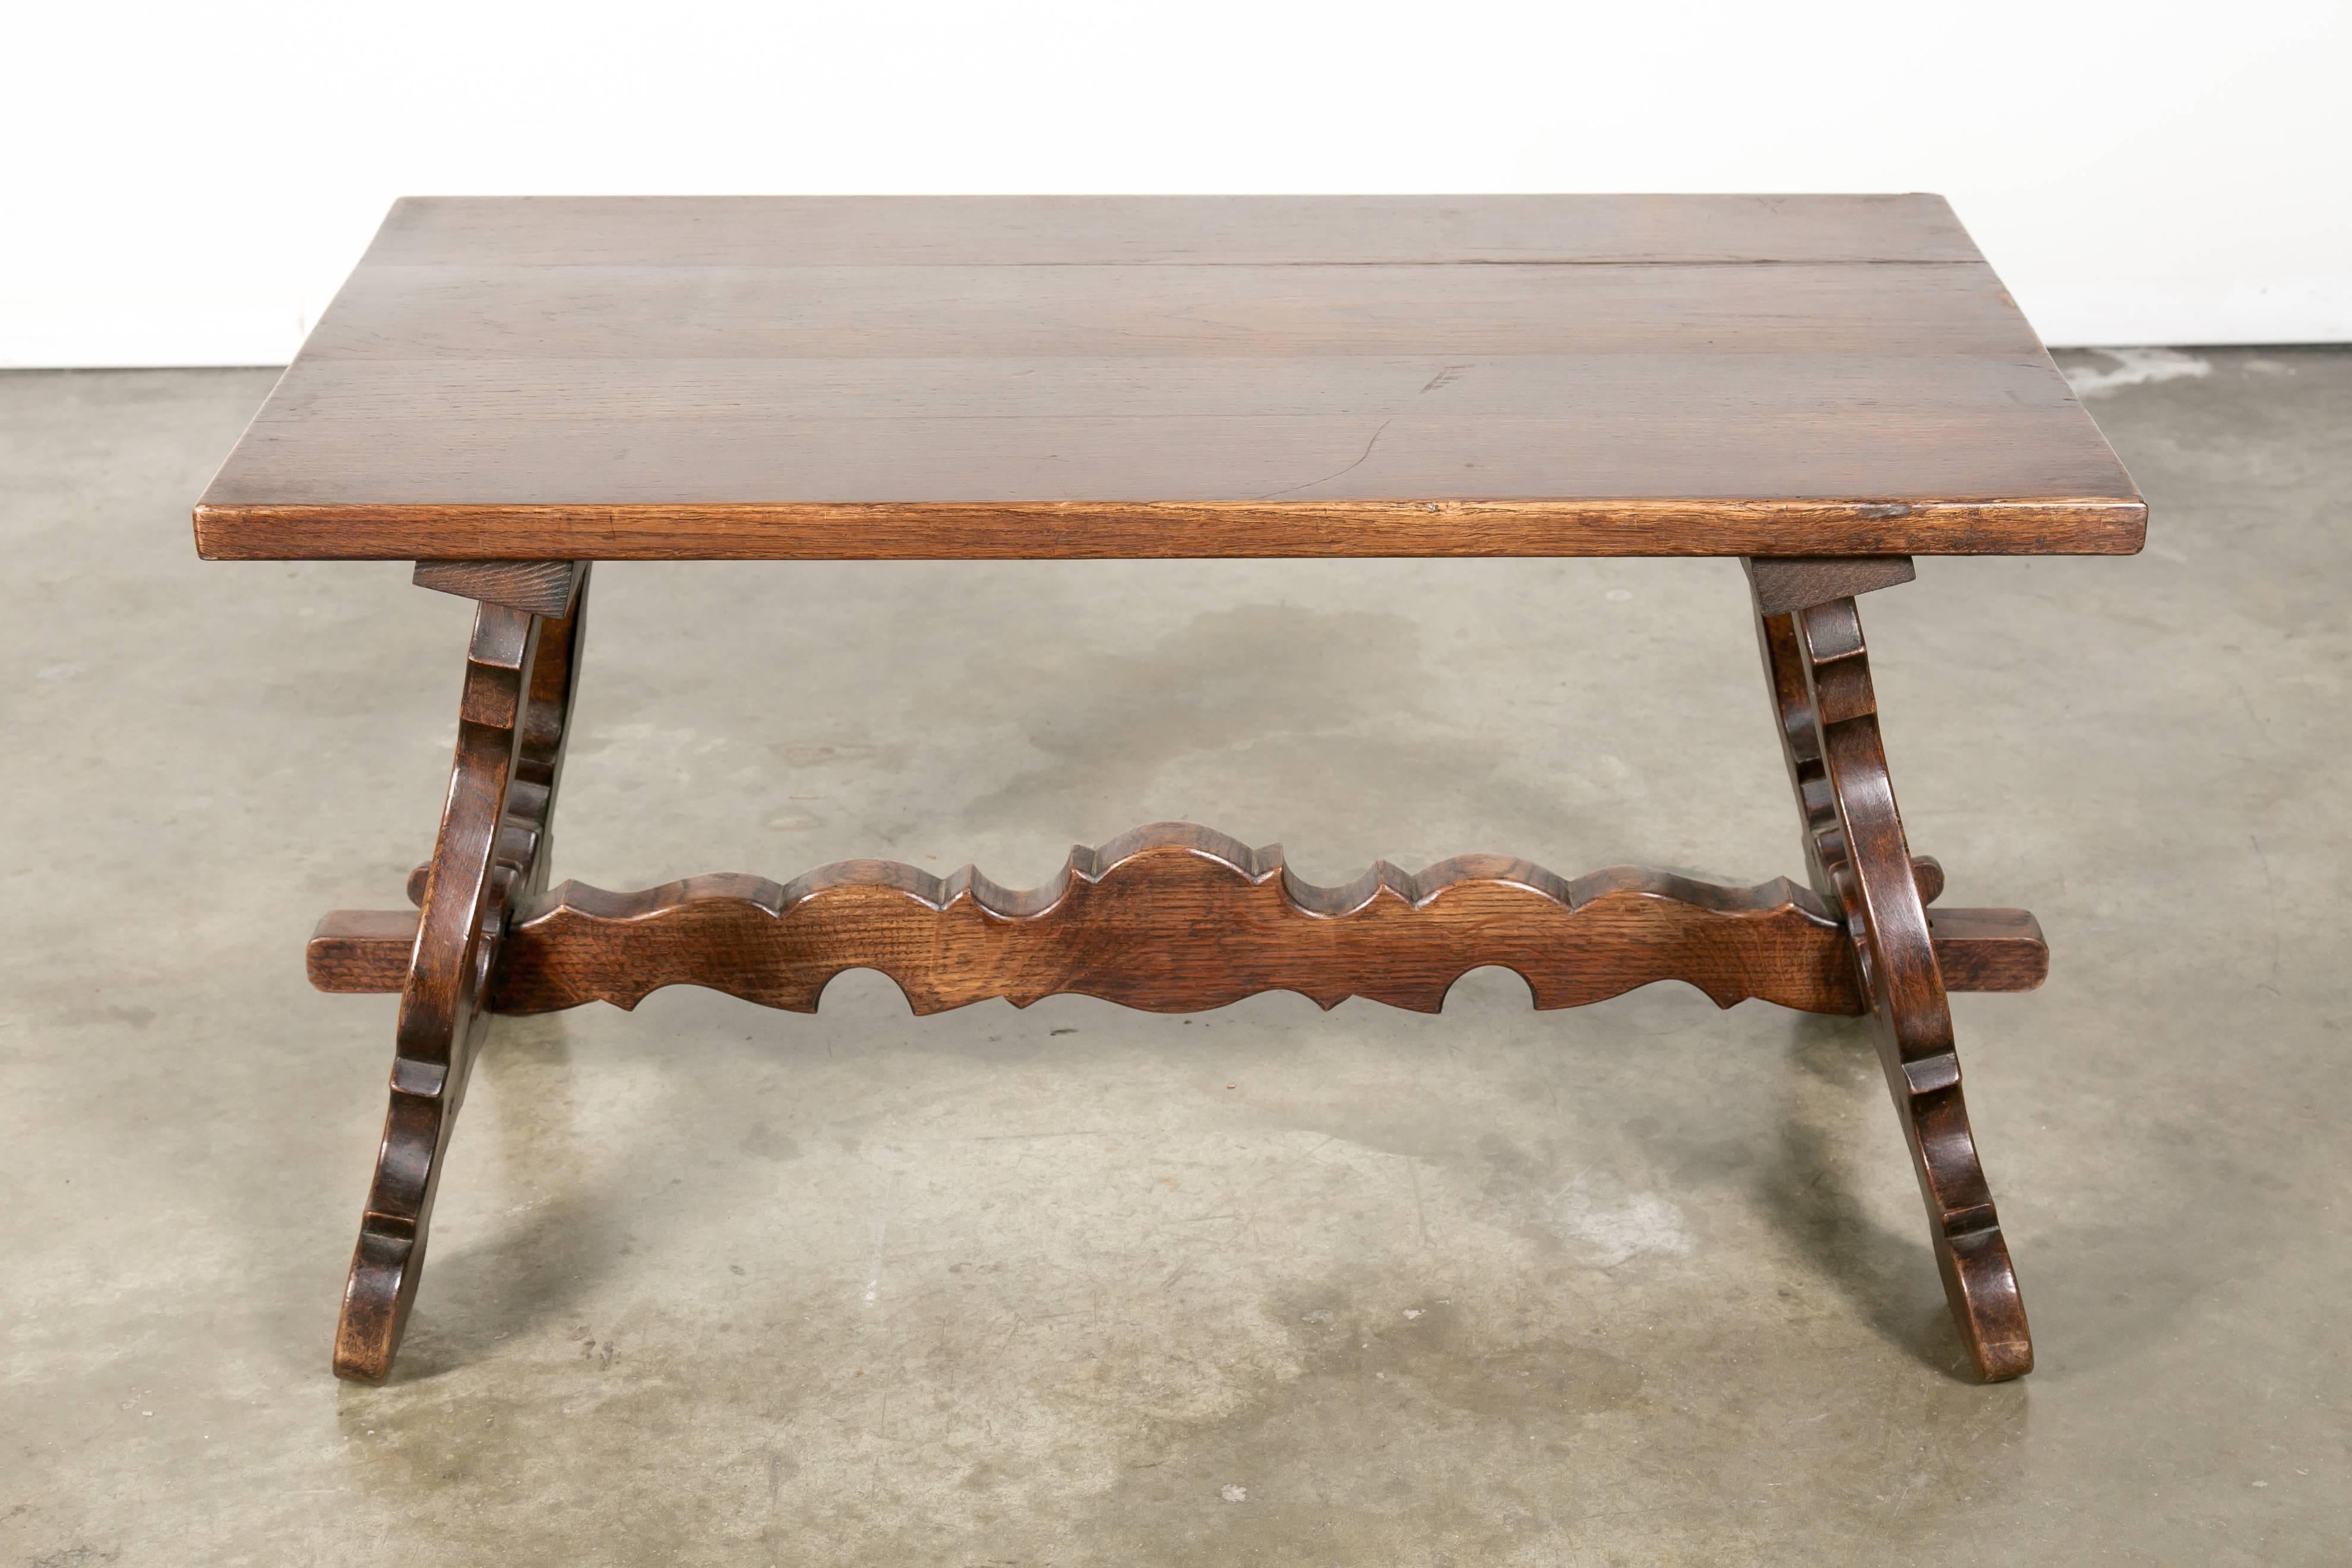 A charming Spanish Colonial style coffee table constructed of solid oak. Graceful sculpted 